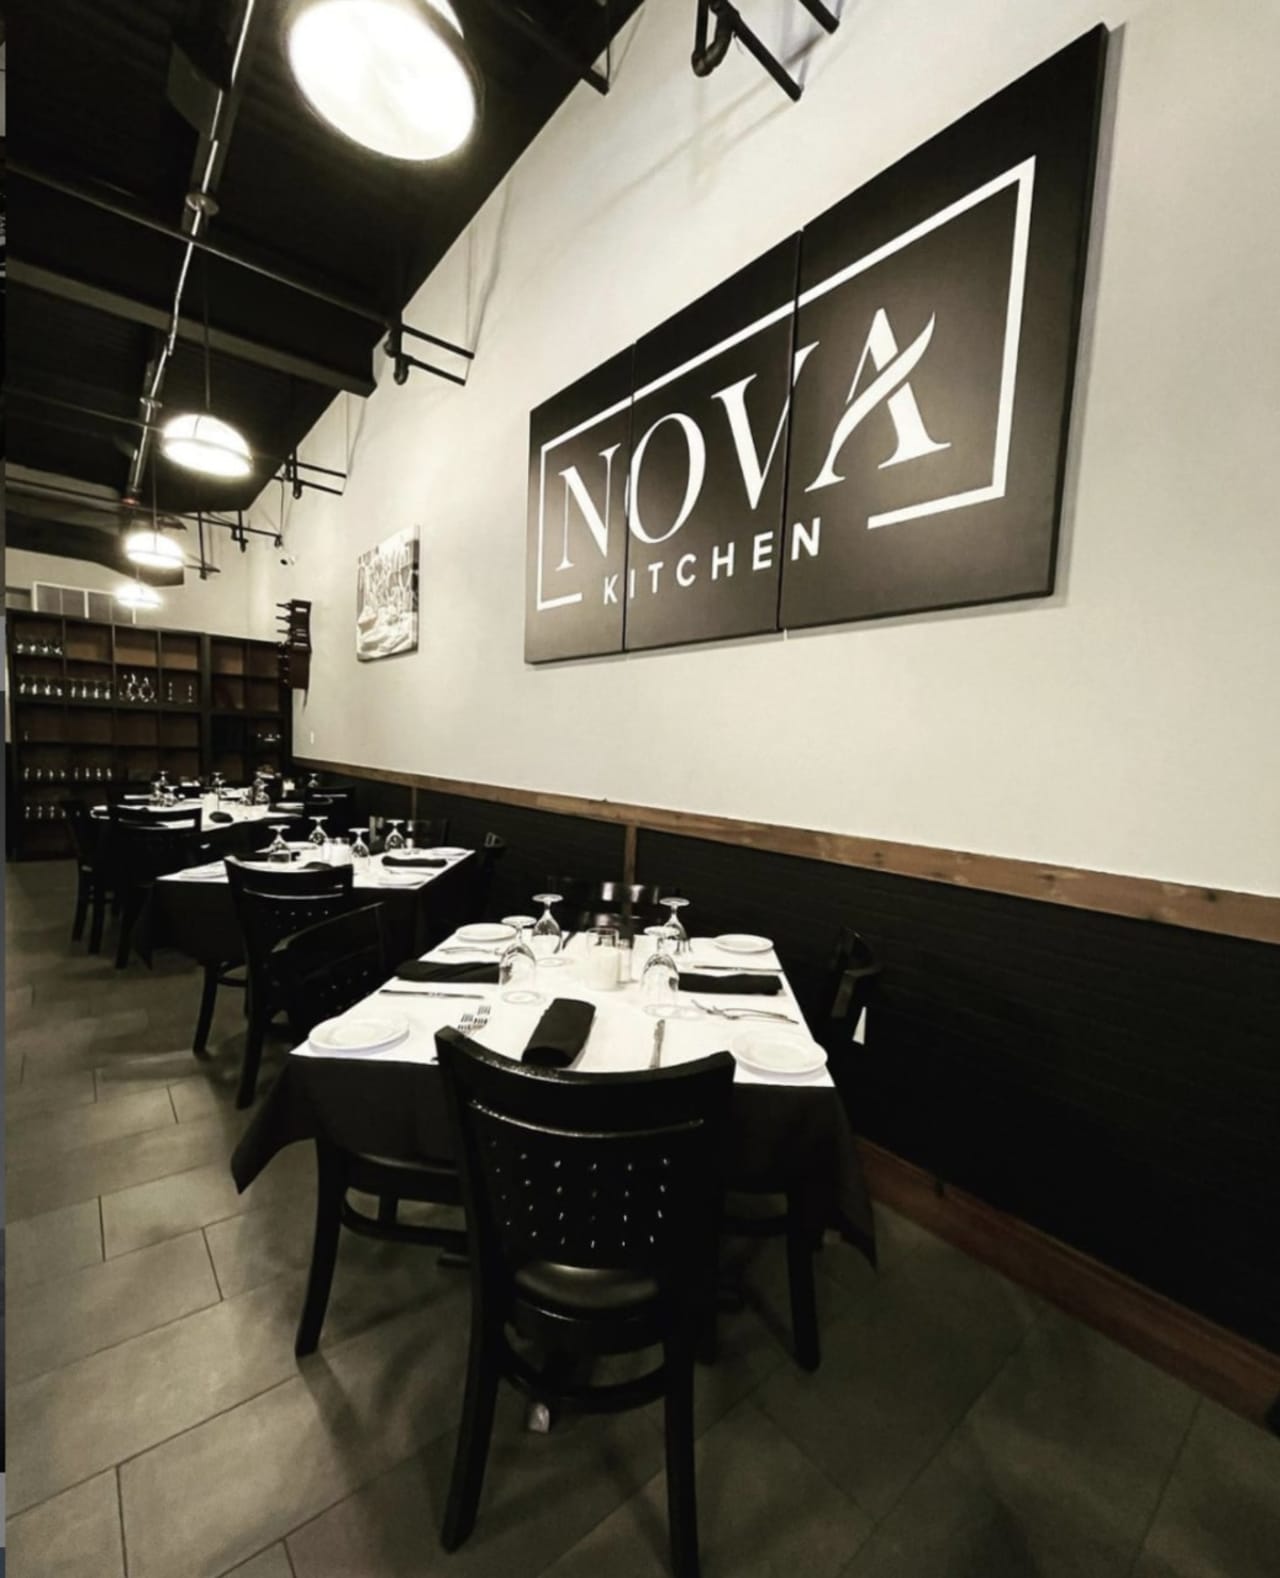 Nova Kitchen has opened in Rockland County.